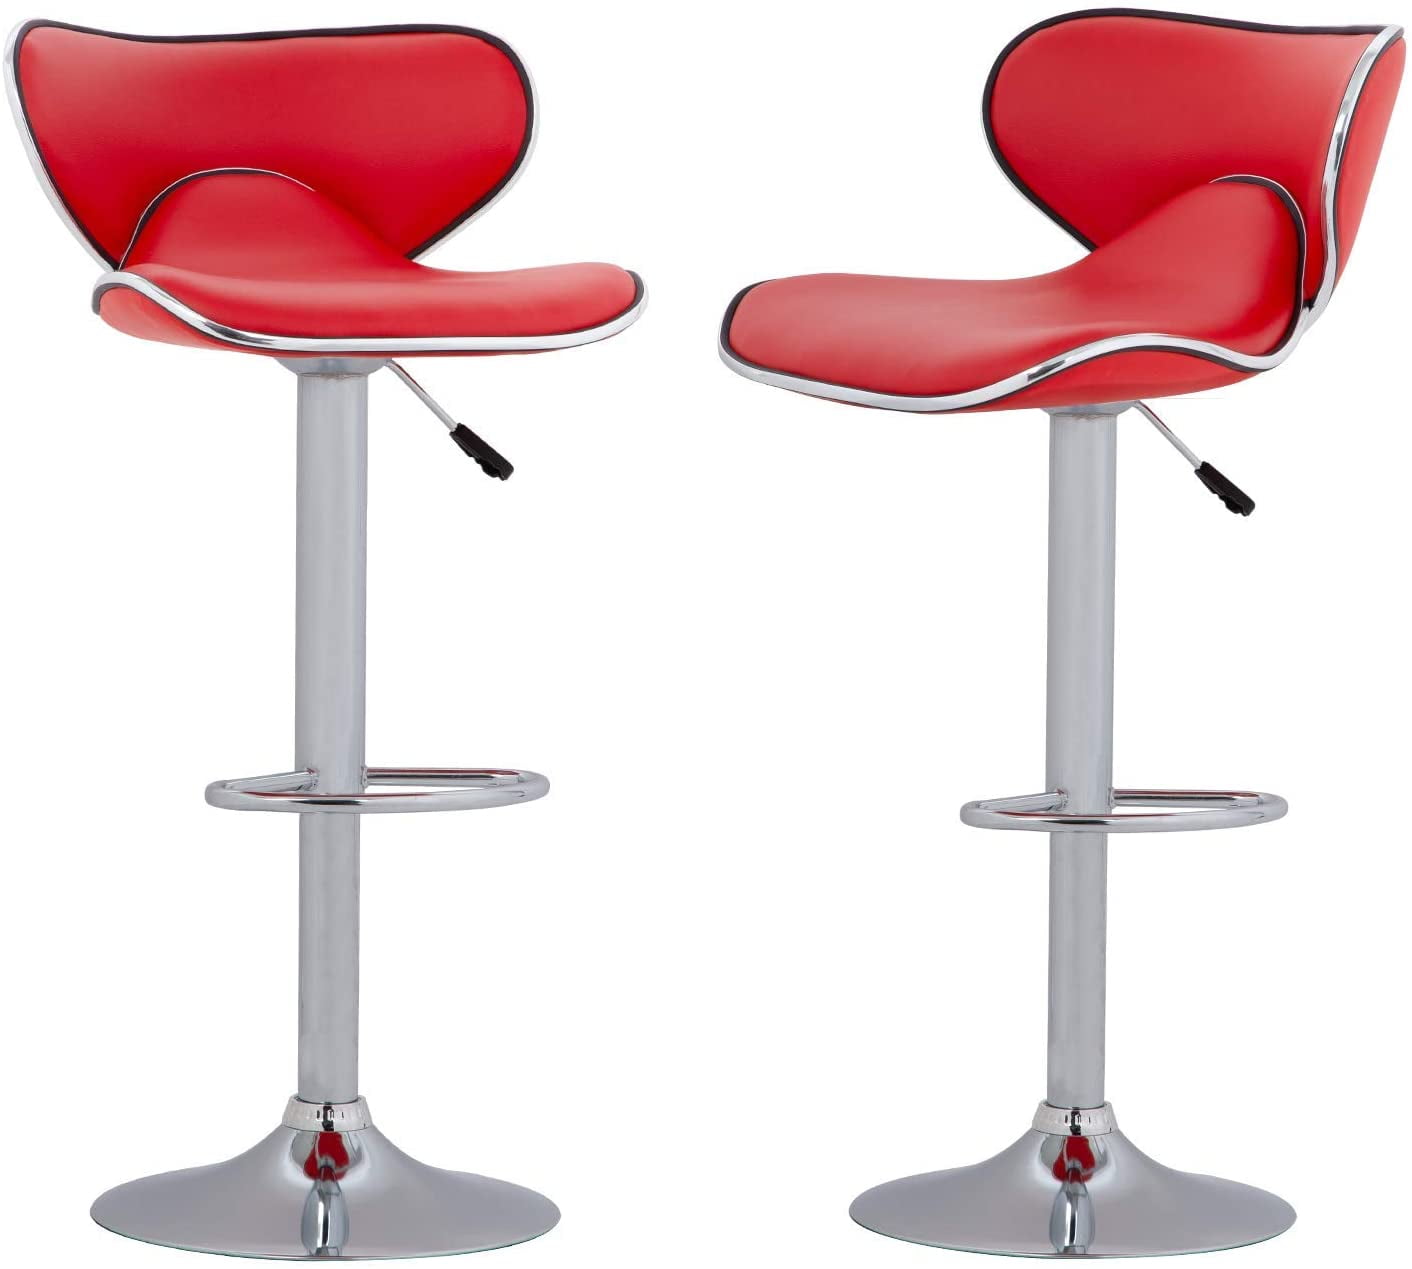 Set Of 2 Red Square Seat Bar Stools Swivel Dinning Counter Adjustable Hts 